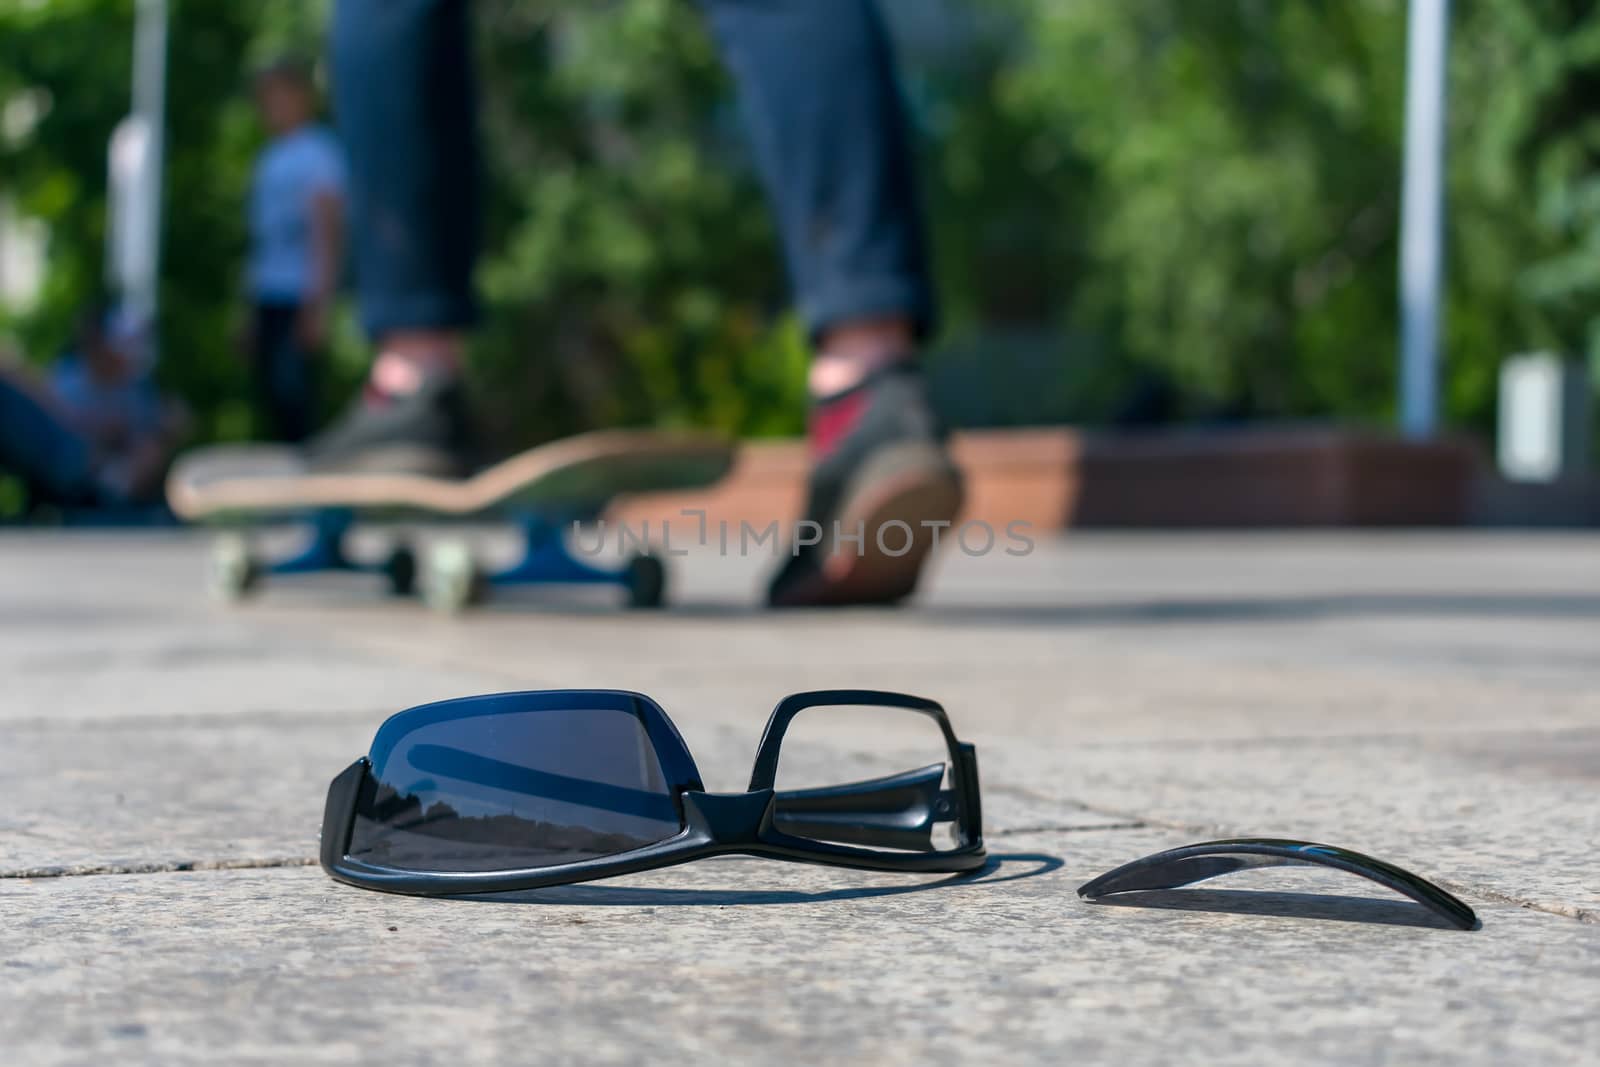 Skateboarder dropped his black glasses on the asphalt while riding the board